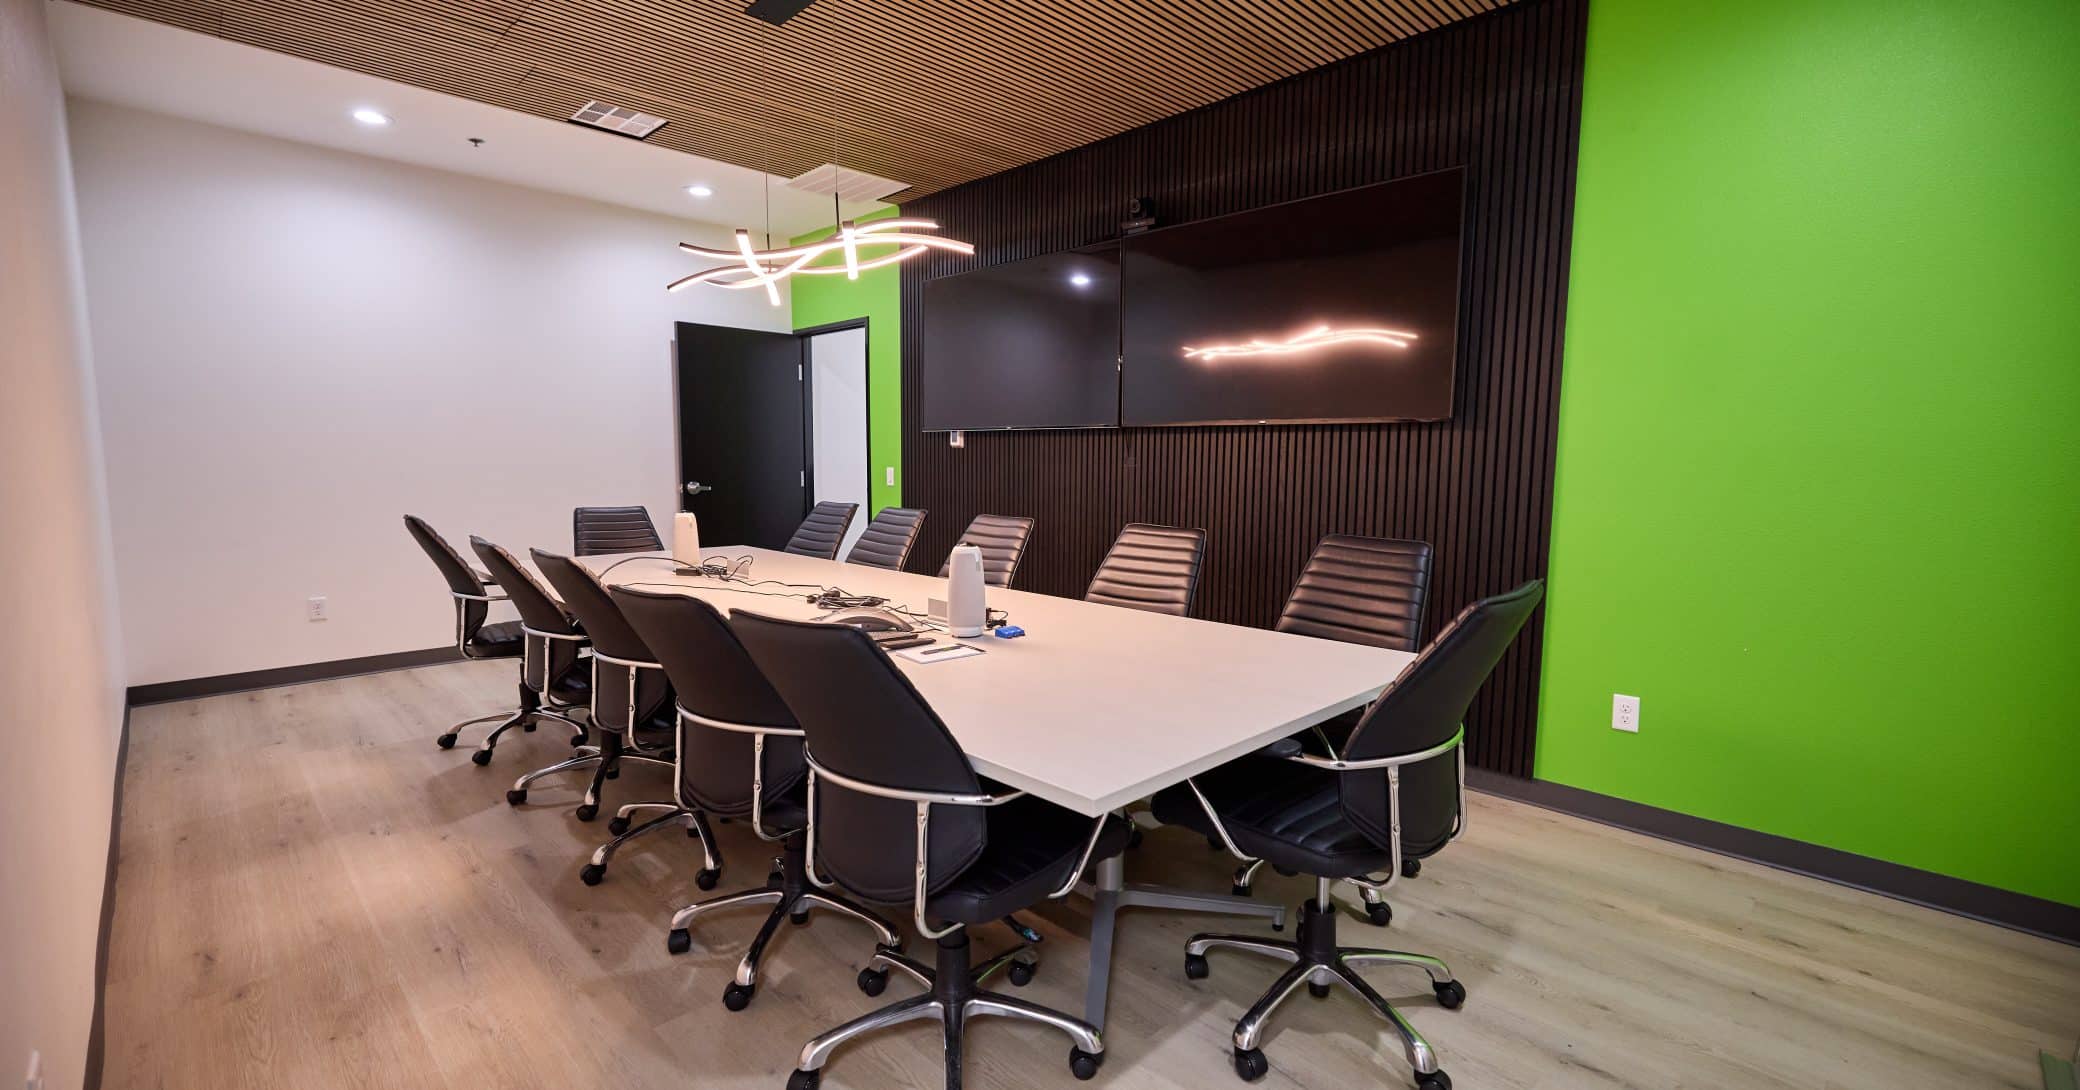 Renovated Office Conference Room by Kalb Industries